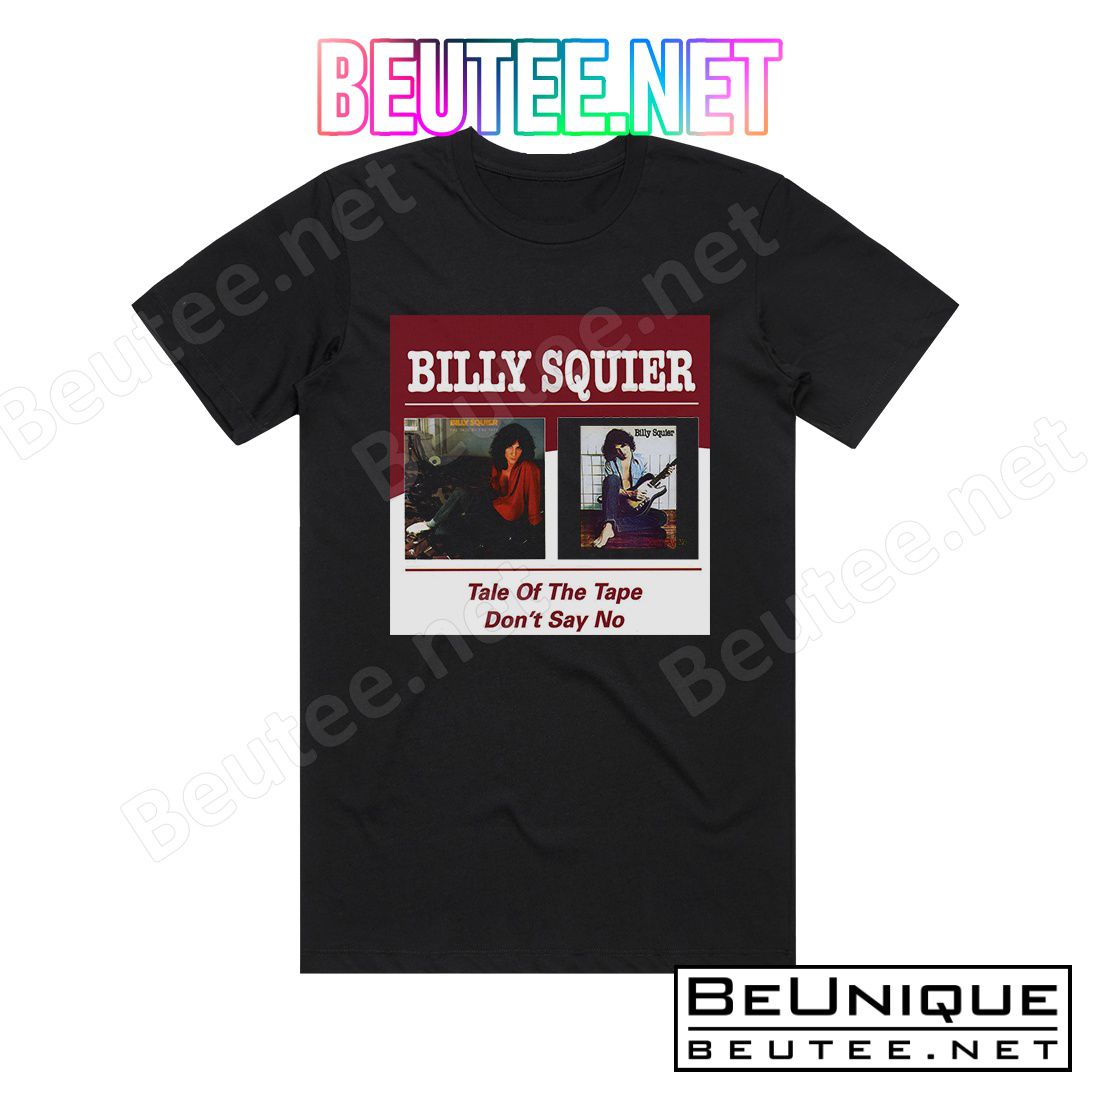 Billy Squier The Tale Of The Tape Don't Say No Album Cover T-Shirt